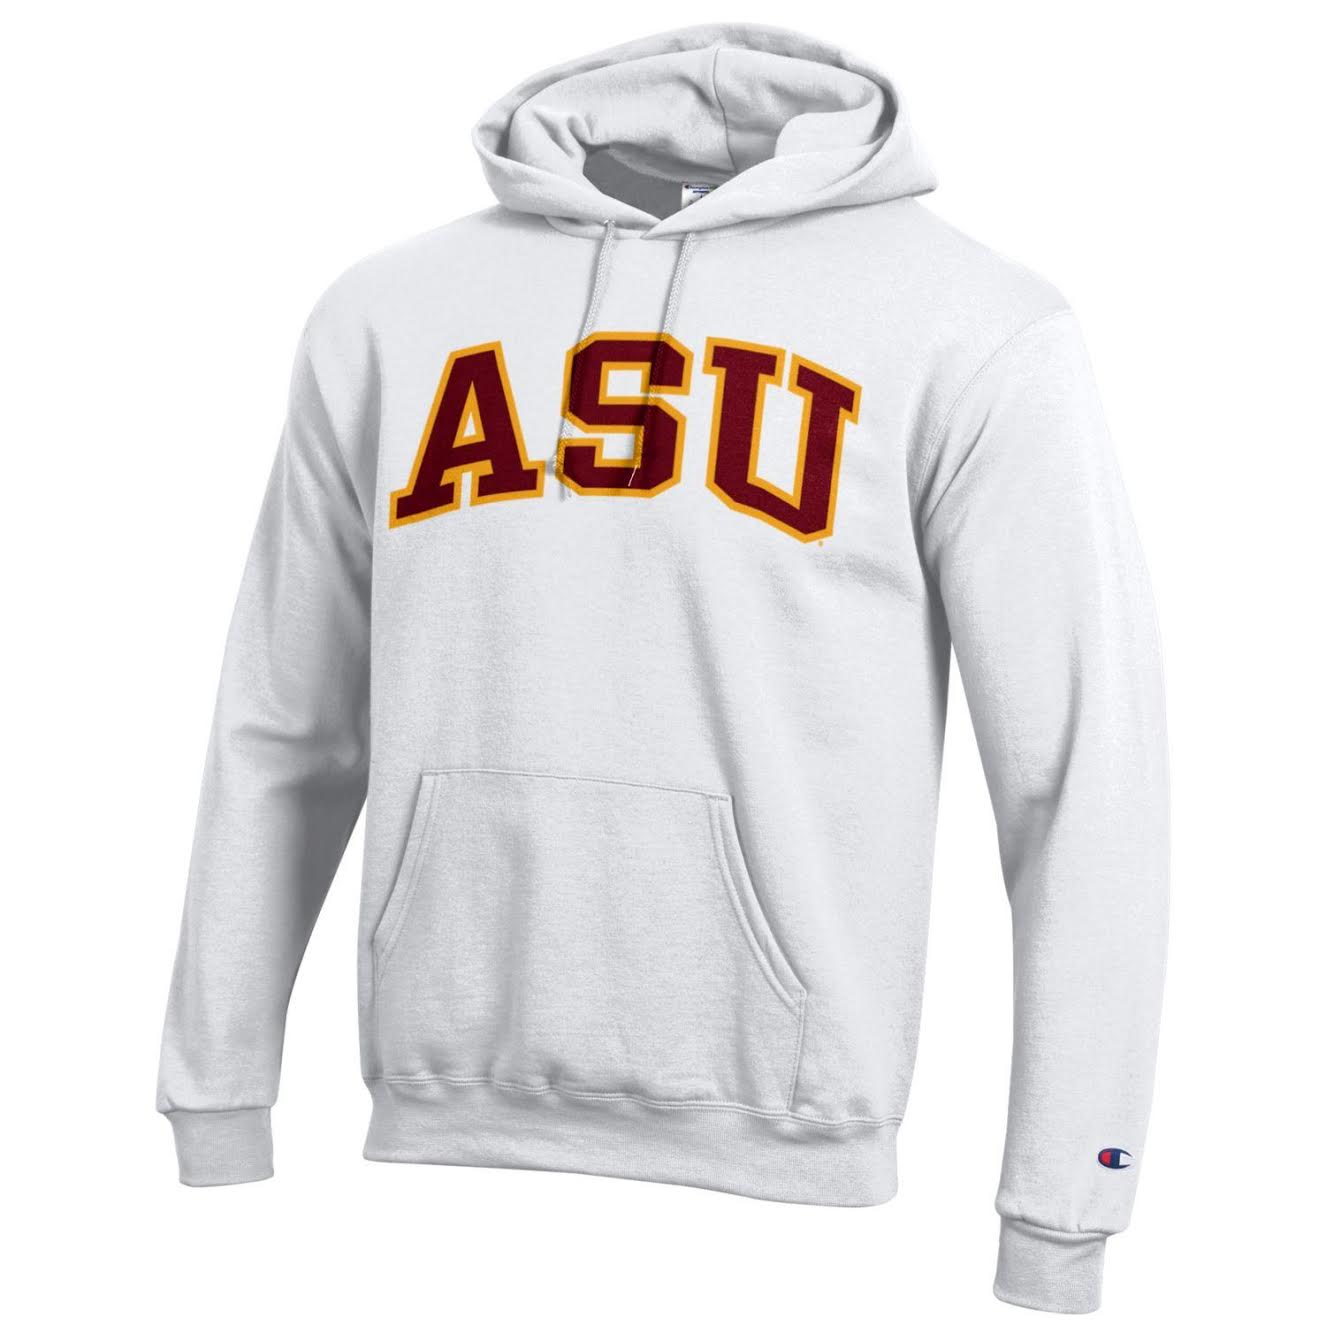 ASU white champion hoodie with ASU stitched across chest in maroon outlined in gold